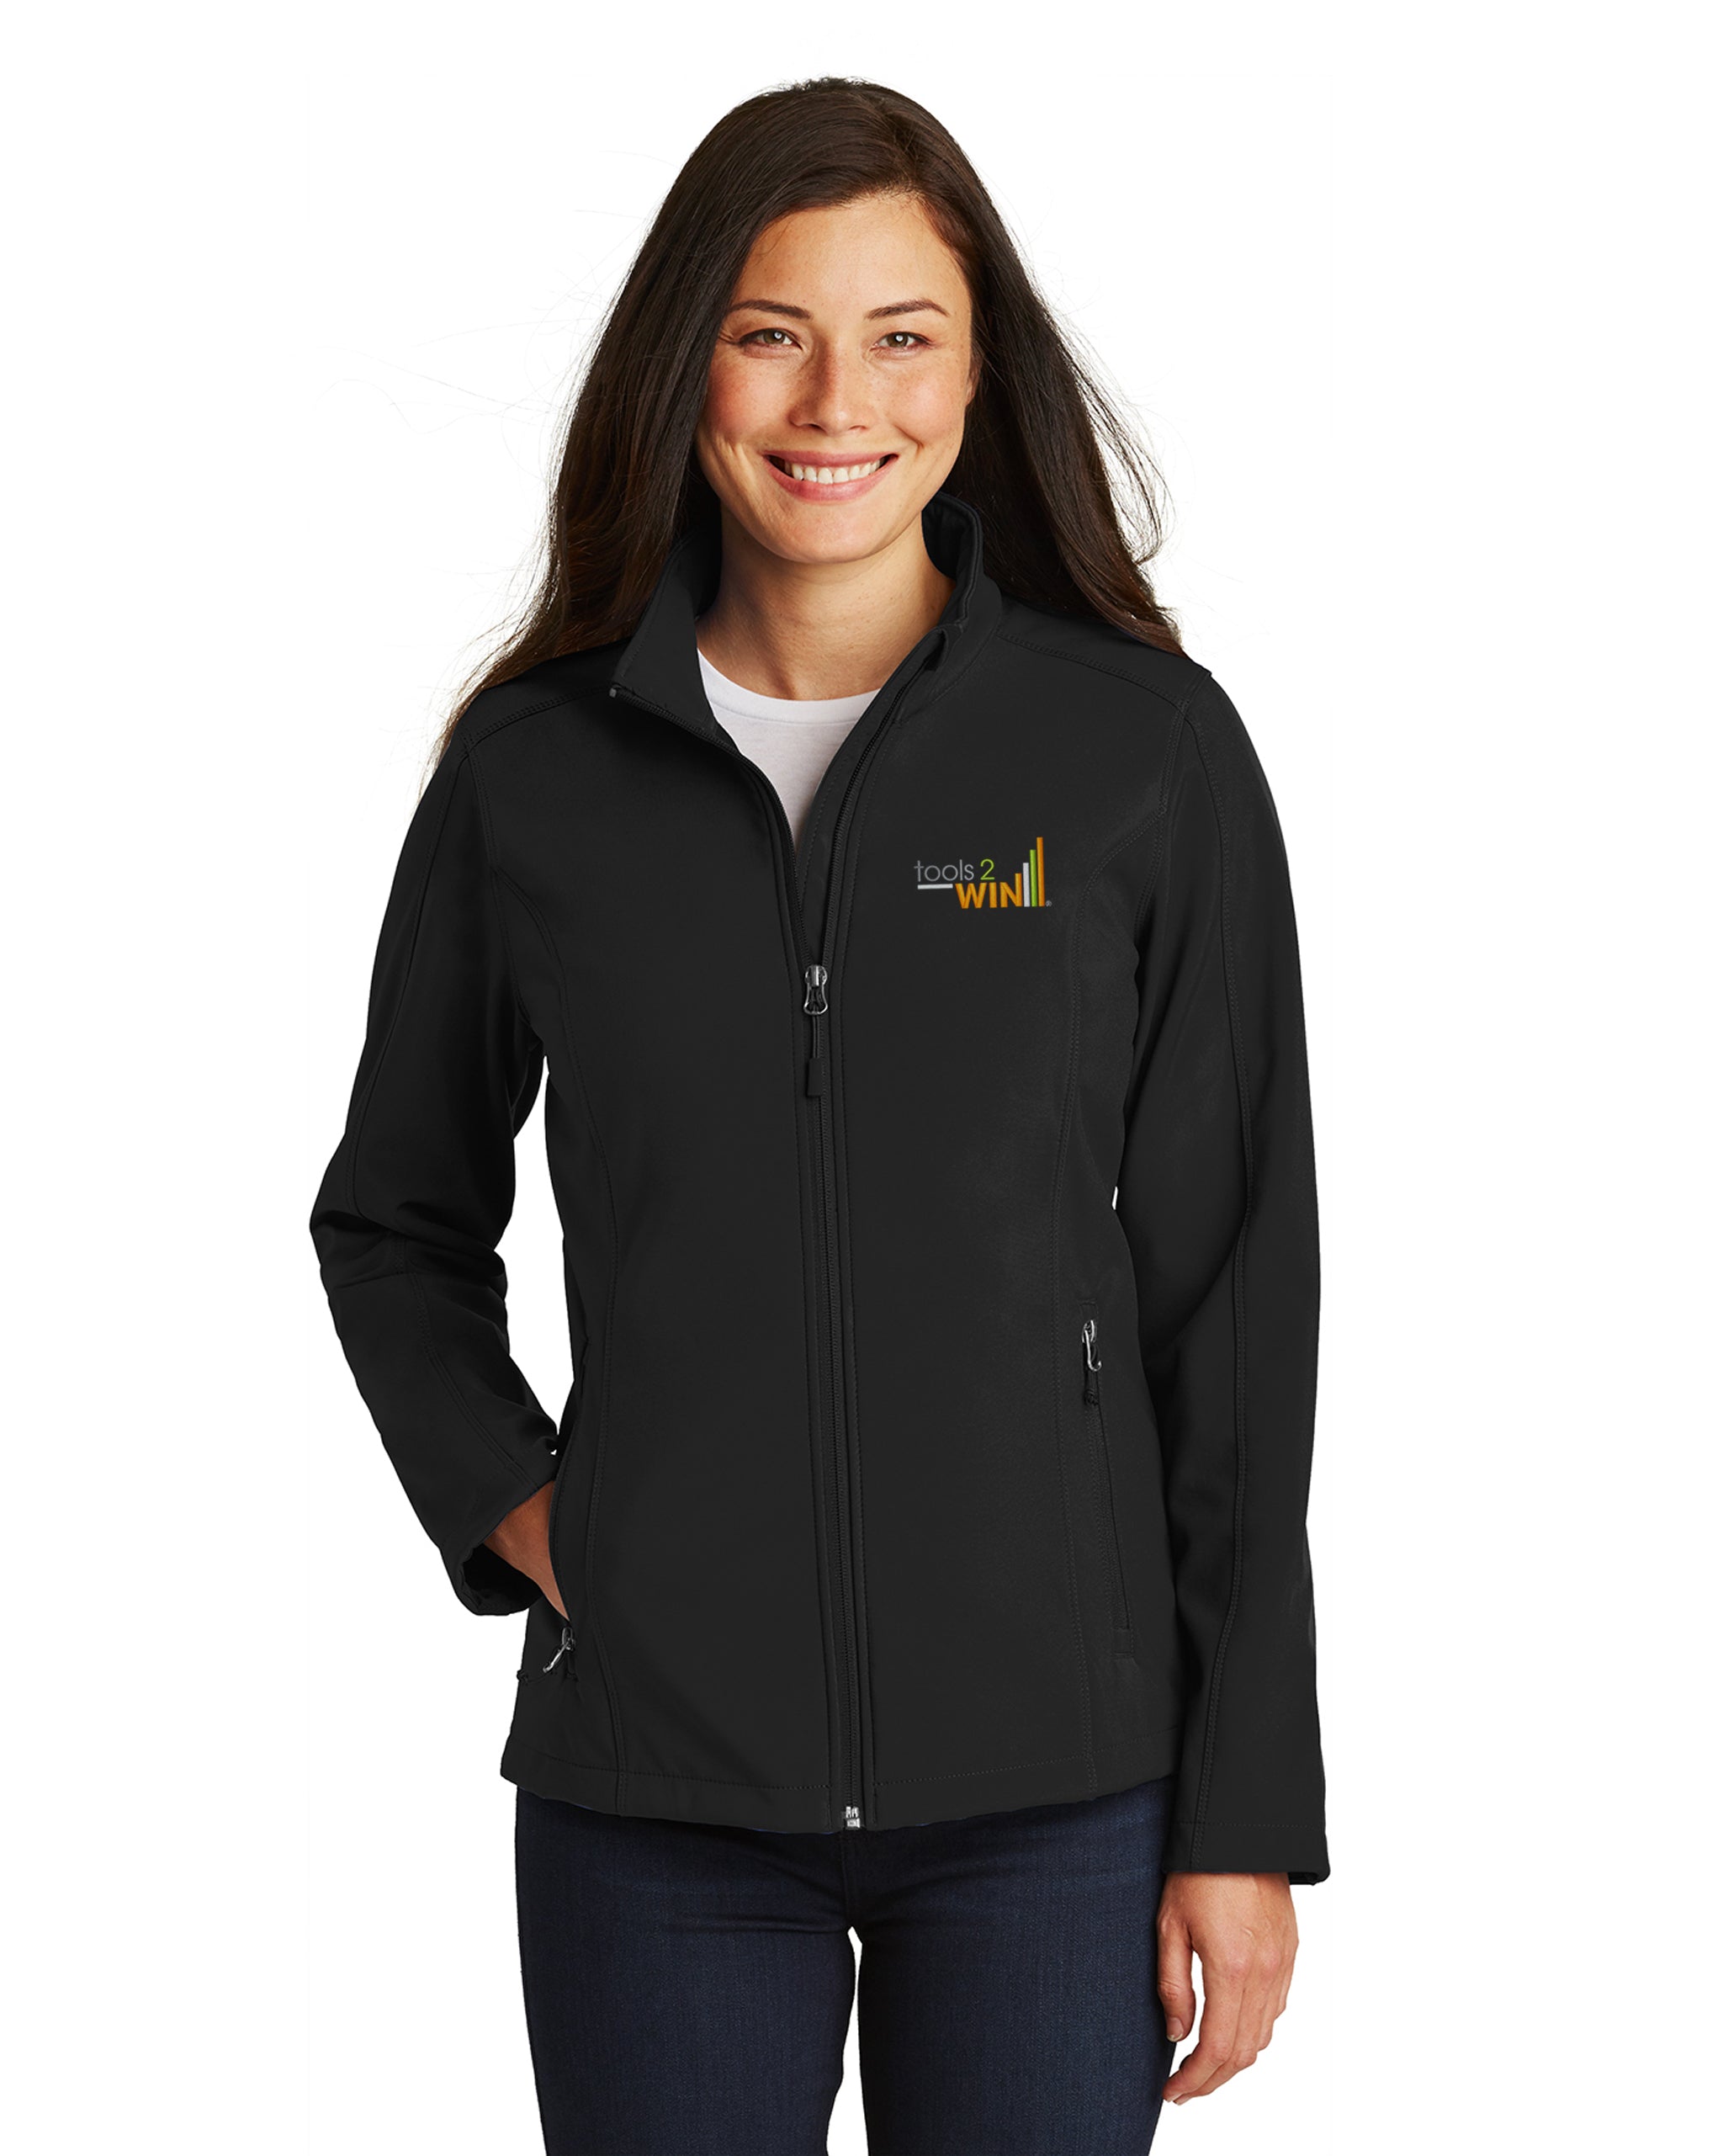 Tools2Win - Port Authority Ladies Core Soft Shell Jacket - L317